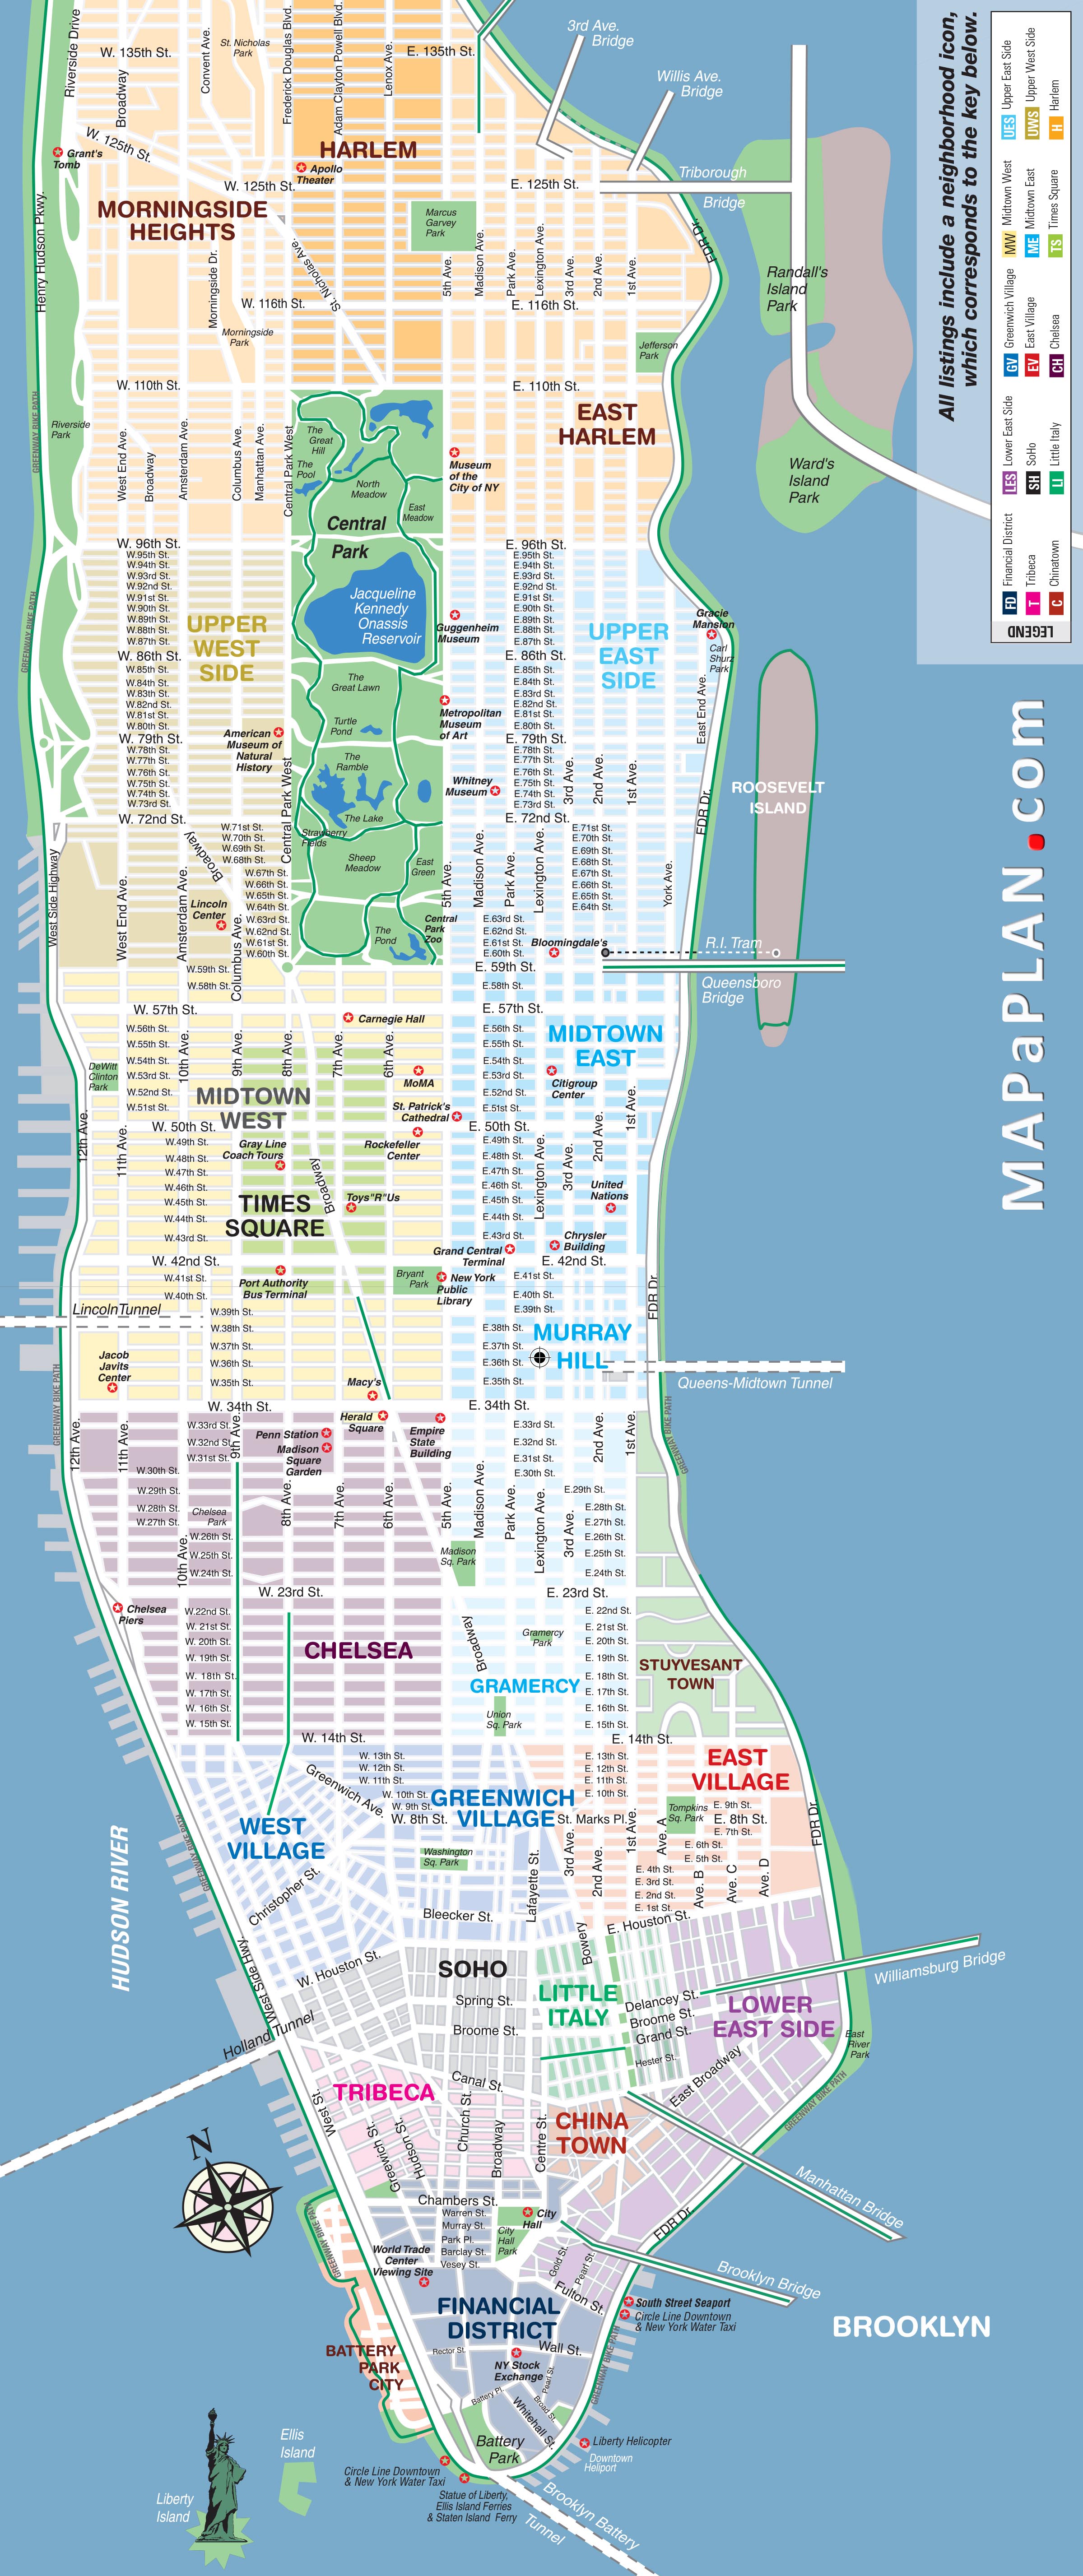 locations-to-visit-in-three-days-new-york-top-tourist-attractions-map